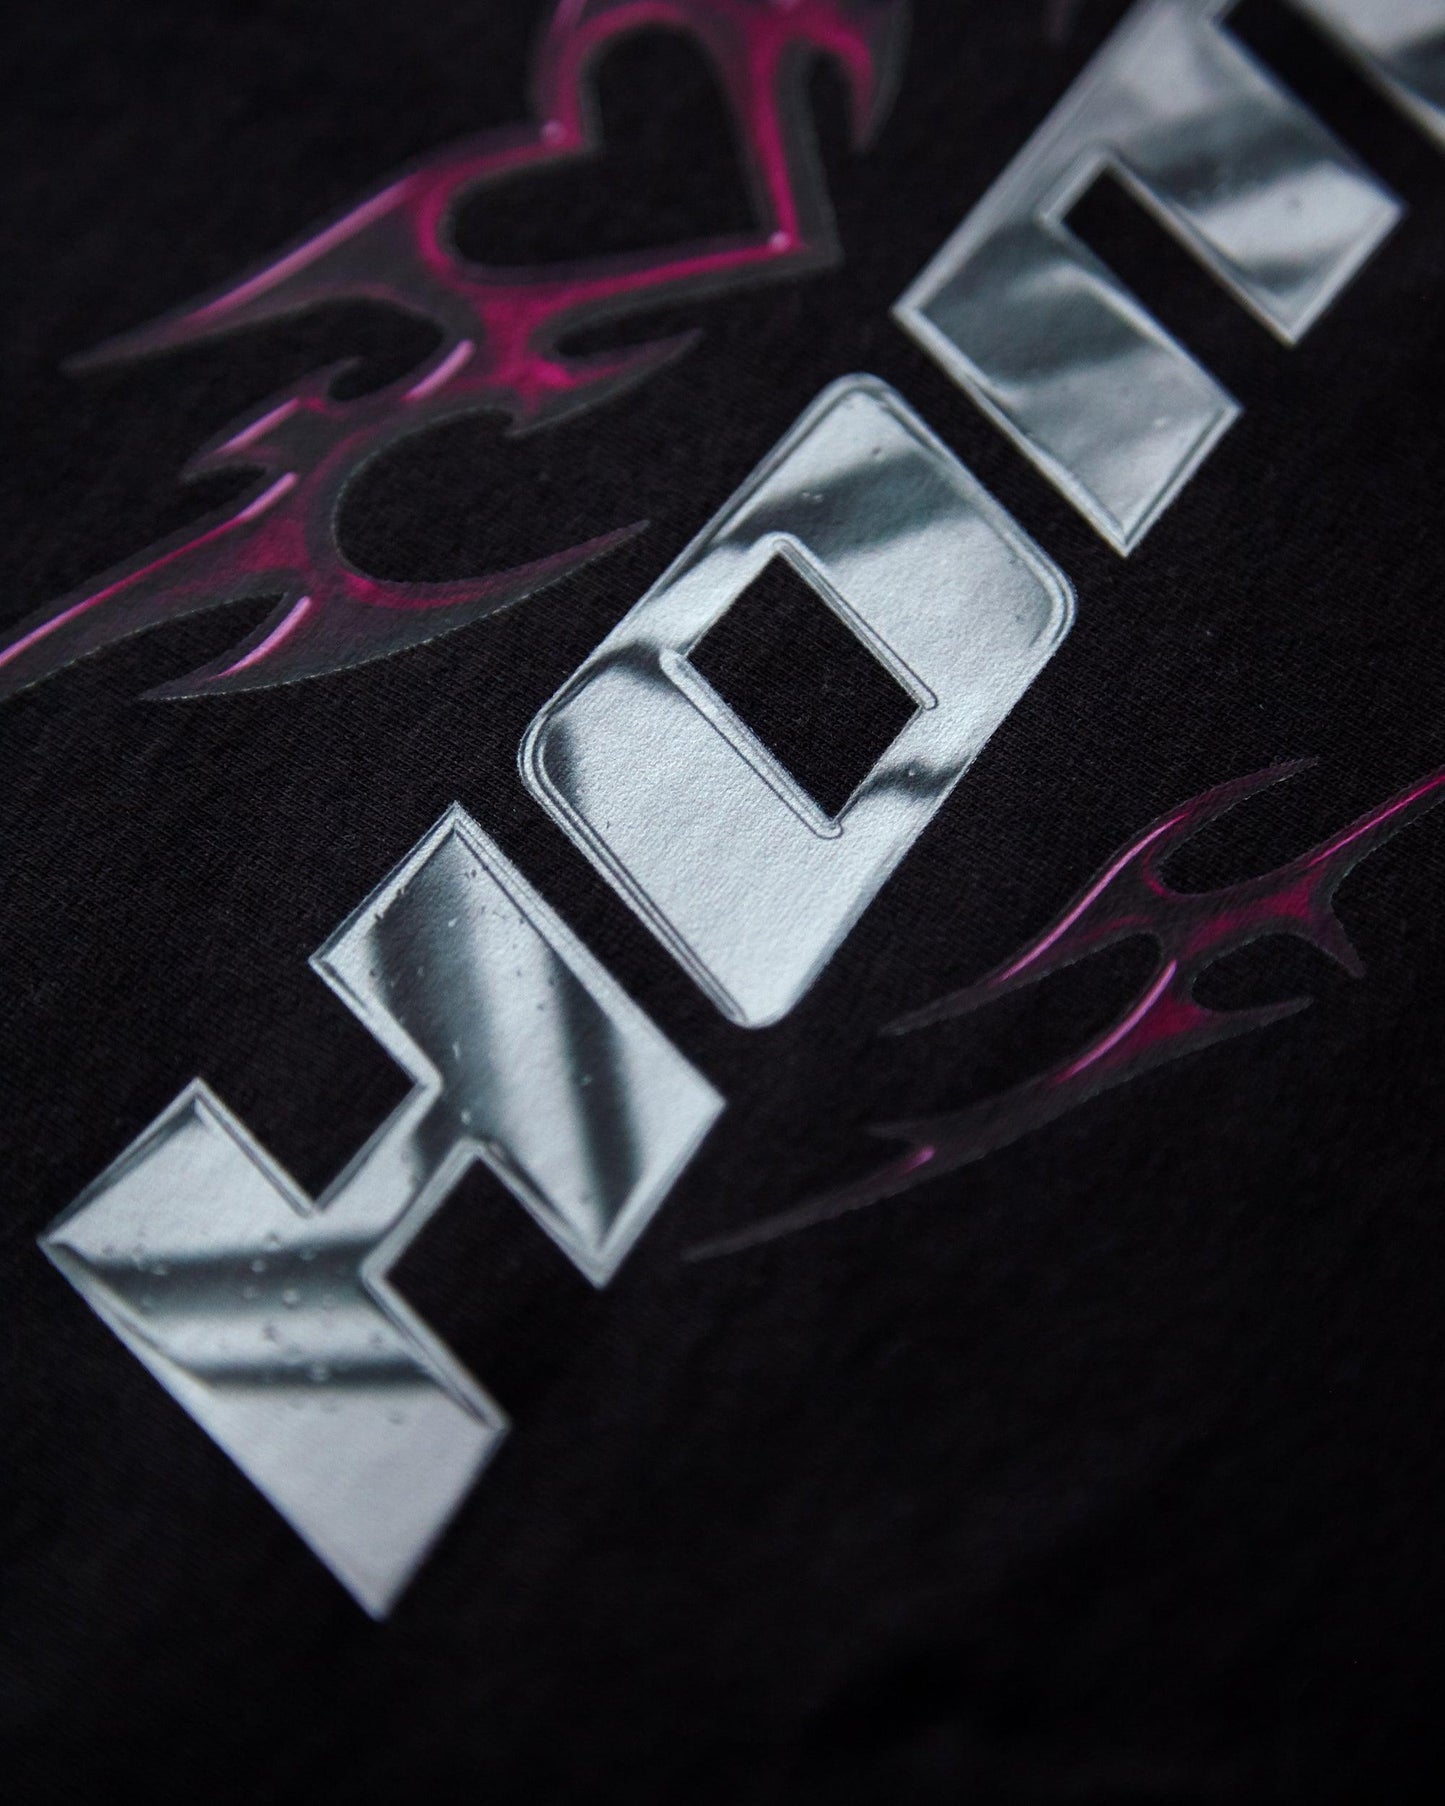 Chrome Y2K: HOMO, silver and pink on black - mens sleeveless crop top. - HOMOLONDON